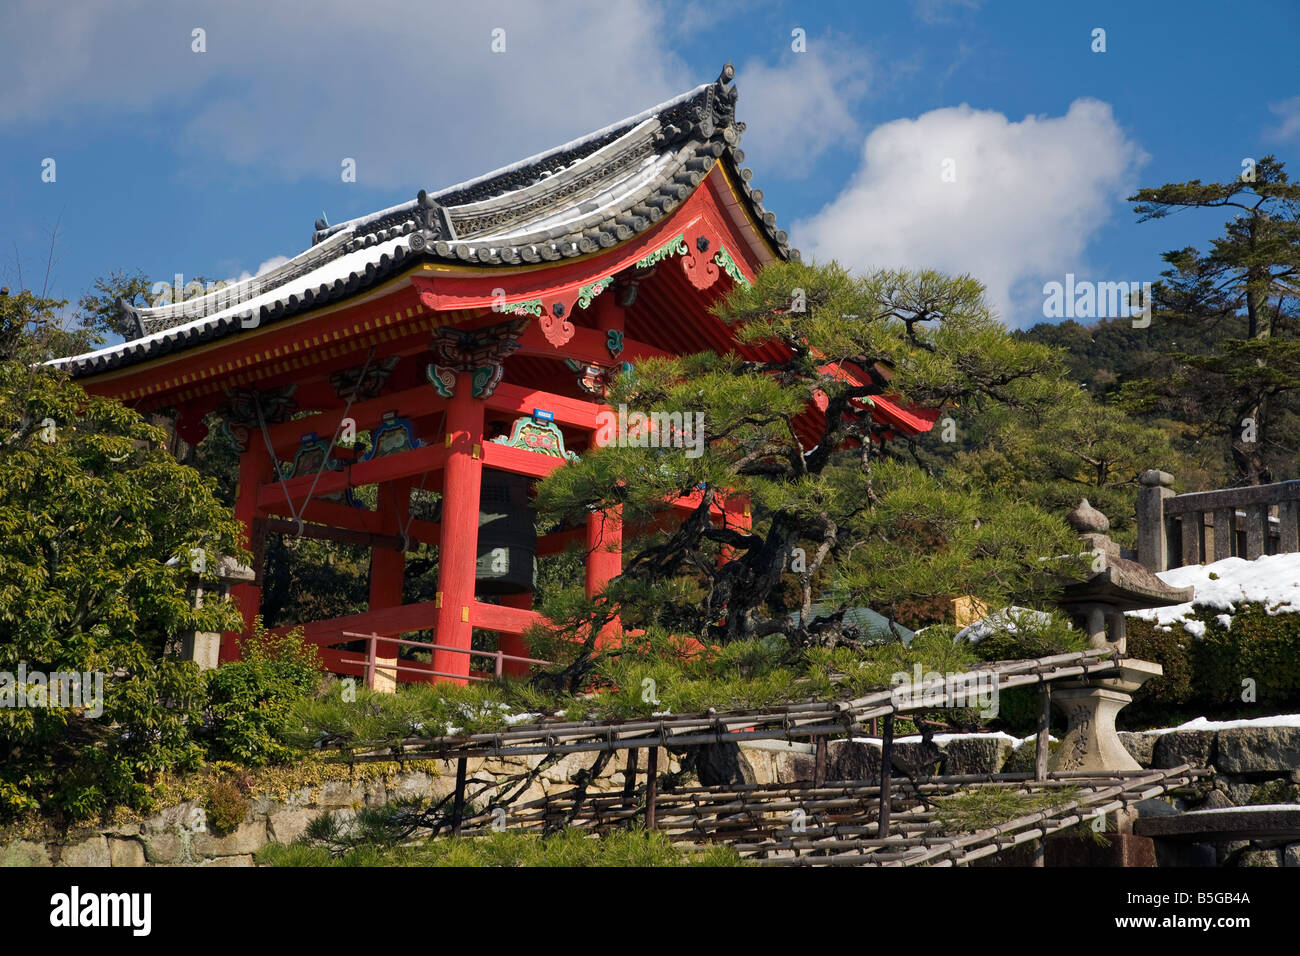 Kyoto City Japan Kiyomizu Temple stone lanterns with temple bell tower in the background Stock Photo